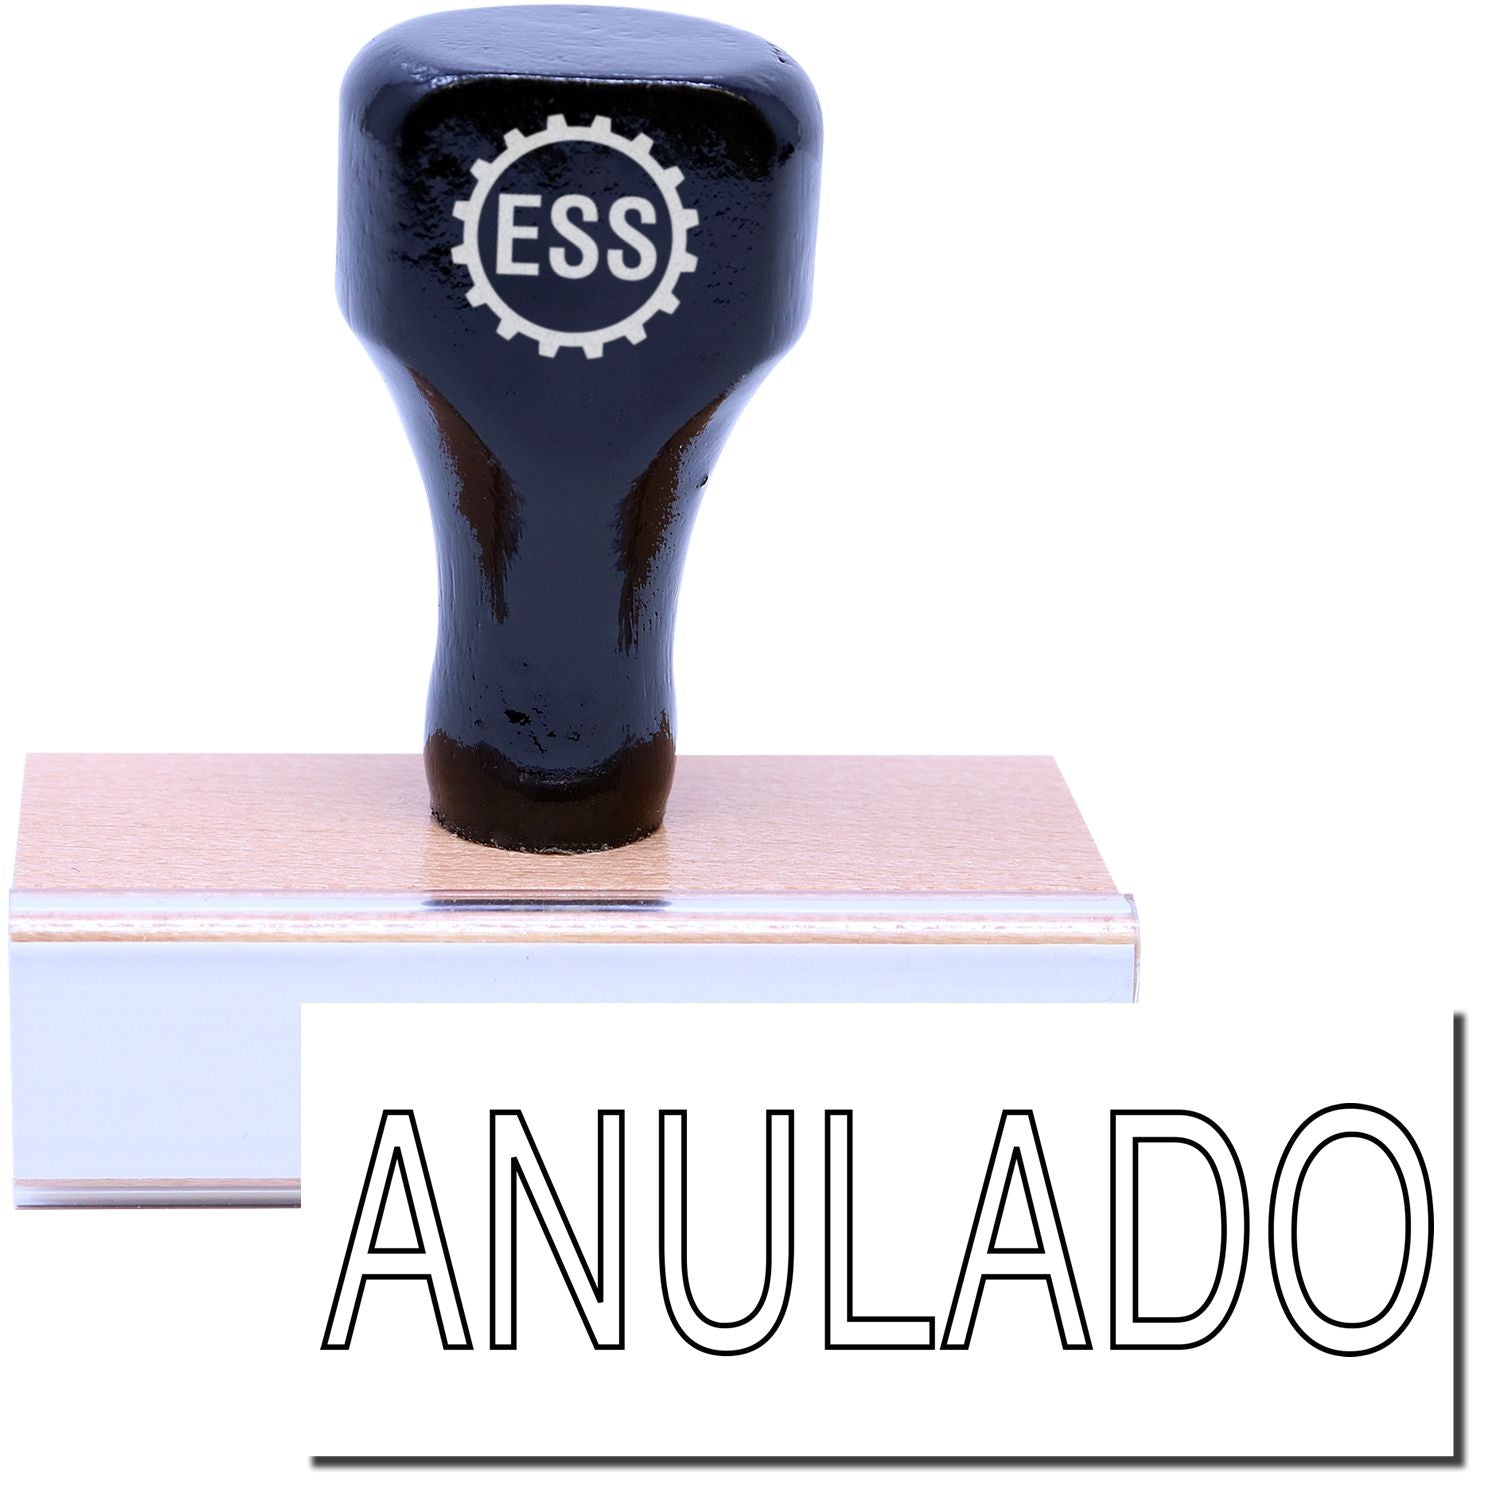 A stock office rubber stamp with a stamped image showing how the text "ANULADO" in an outline font is displayed after stamping.